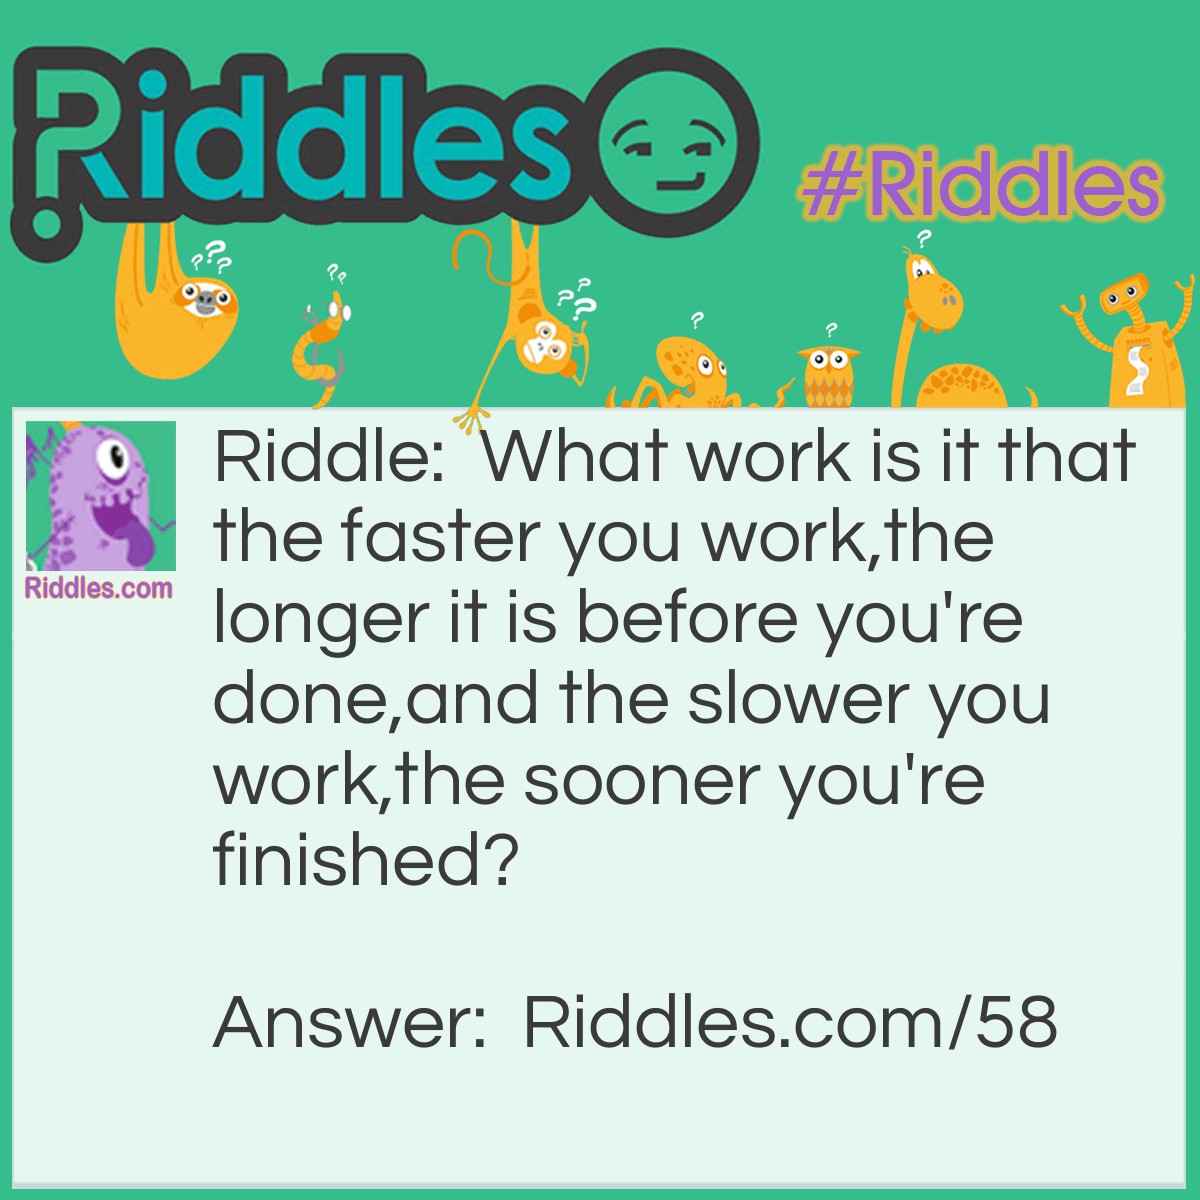 Riddle: What work is it that the faster you work,
the longer it is before you're done,
and the slower you work,
the sooner you're finished? Answer: Roasting meat on a spit.